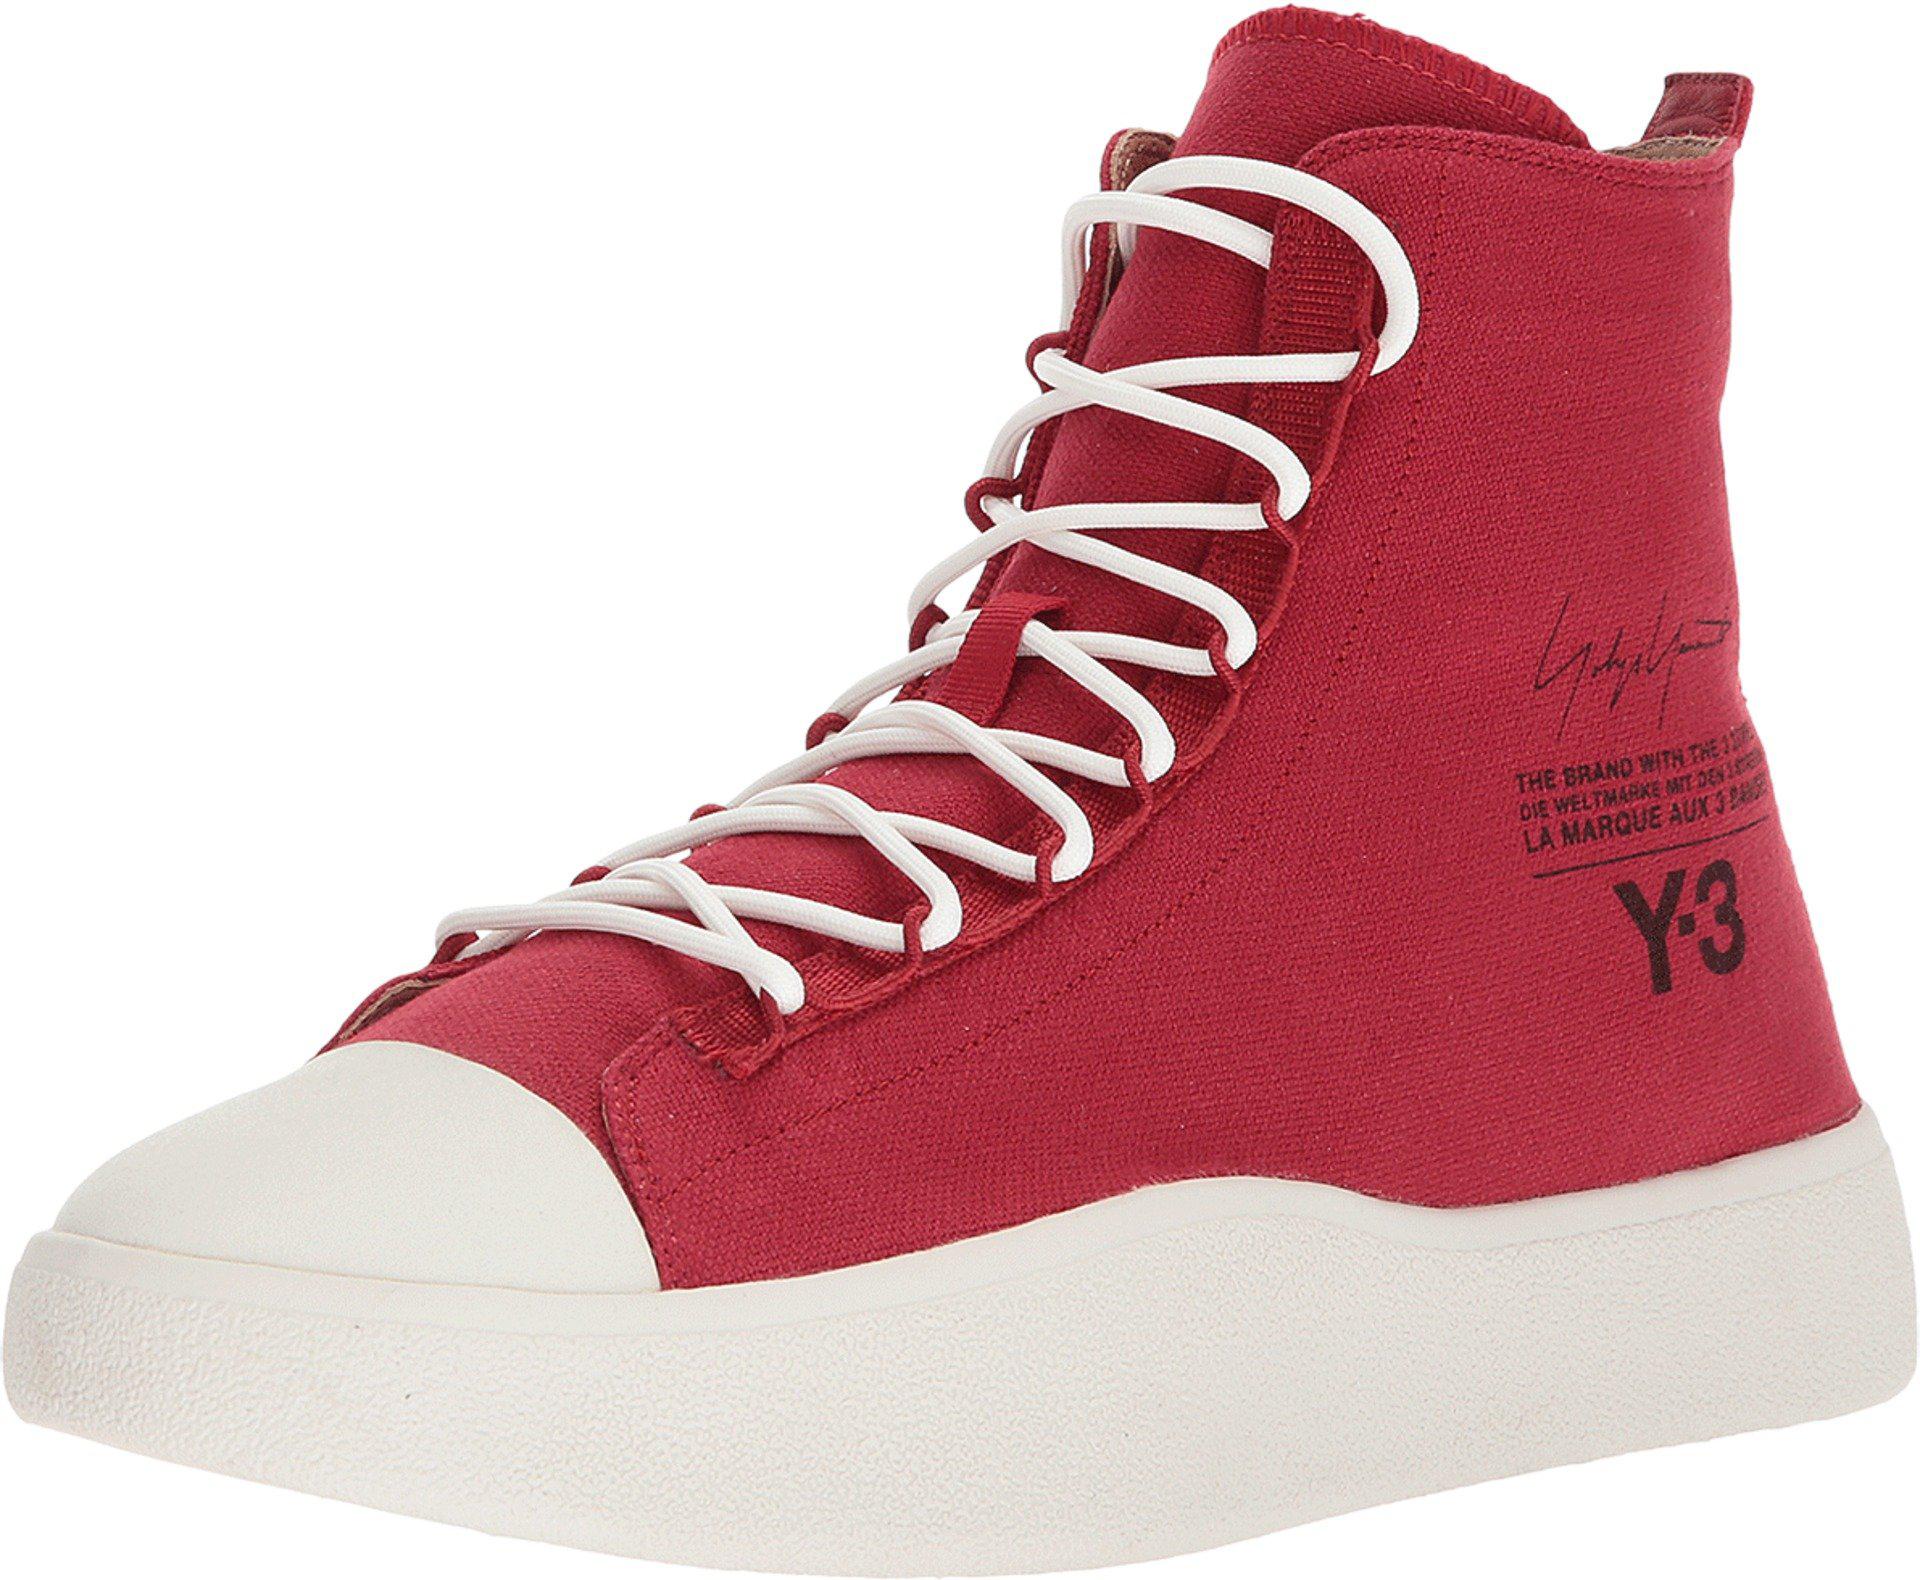 y 3 red shoes